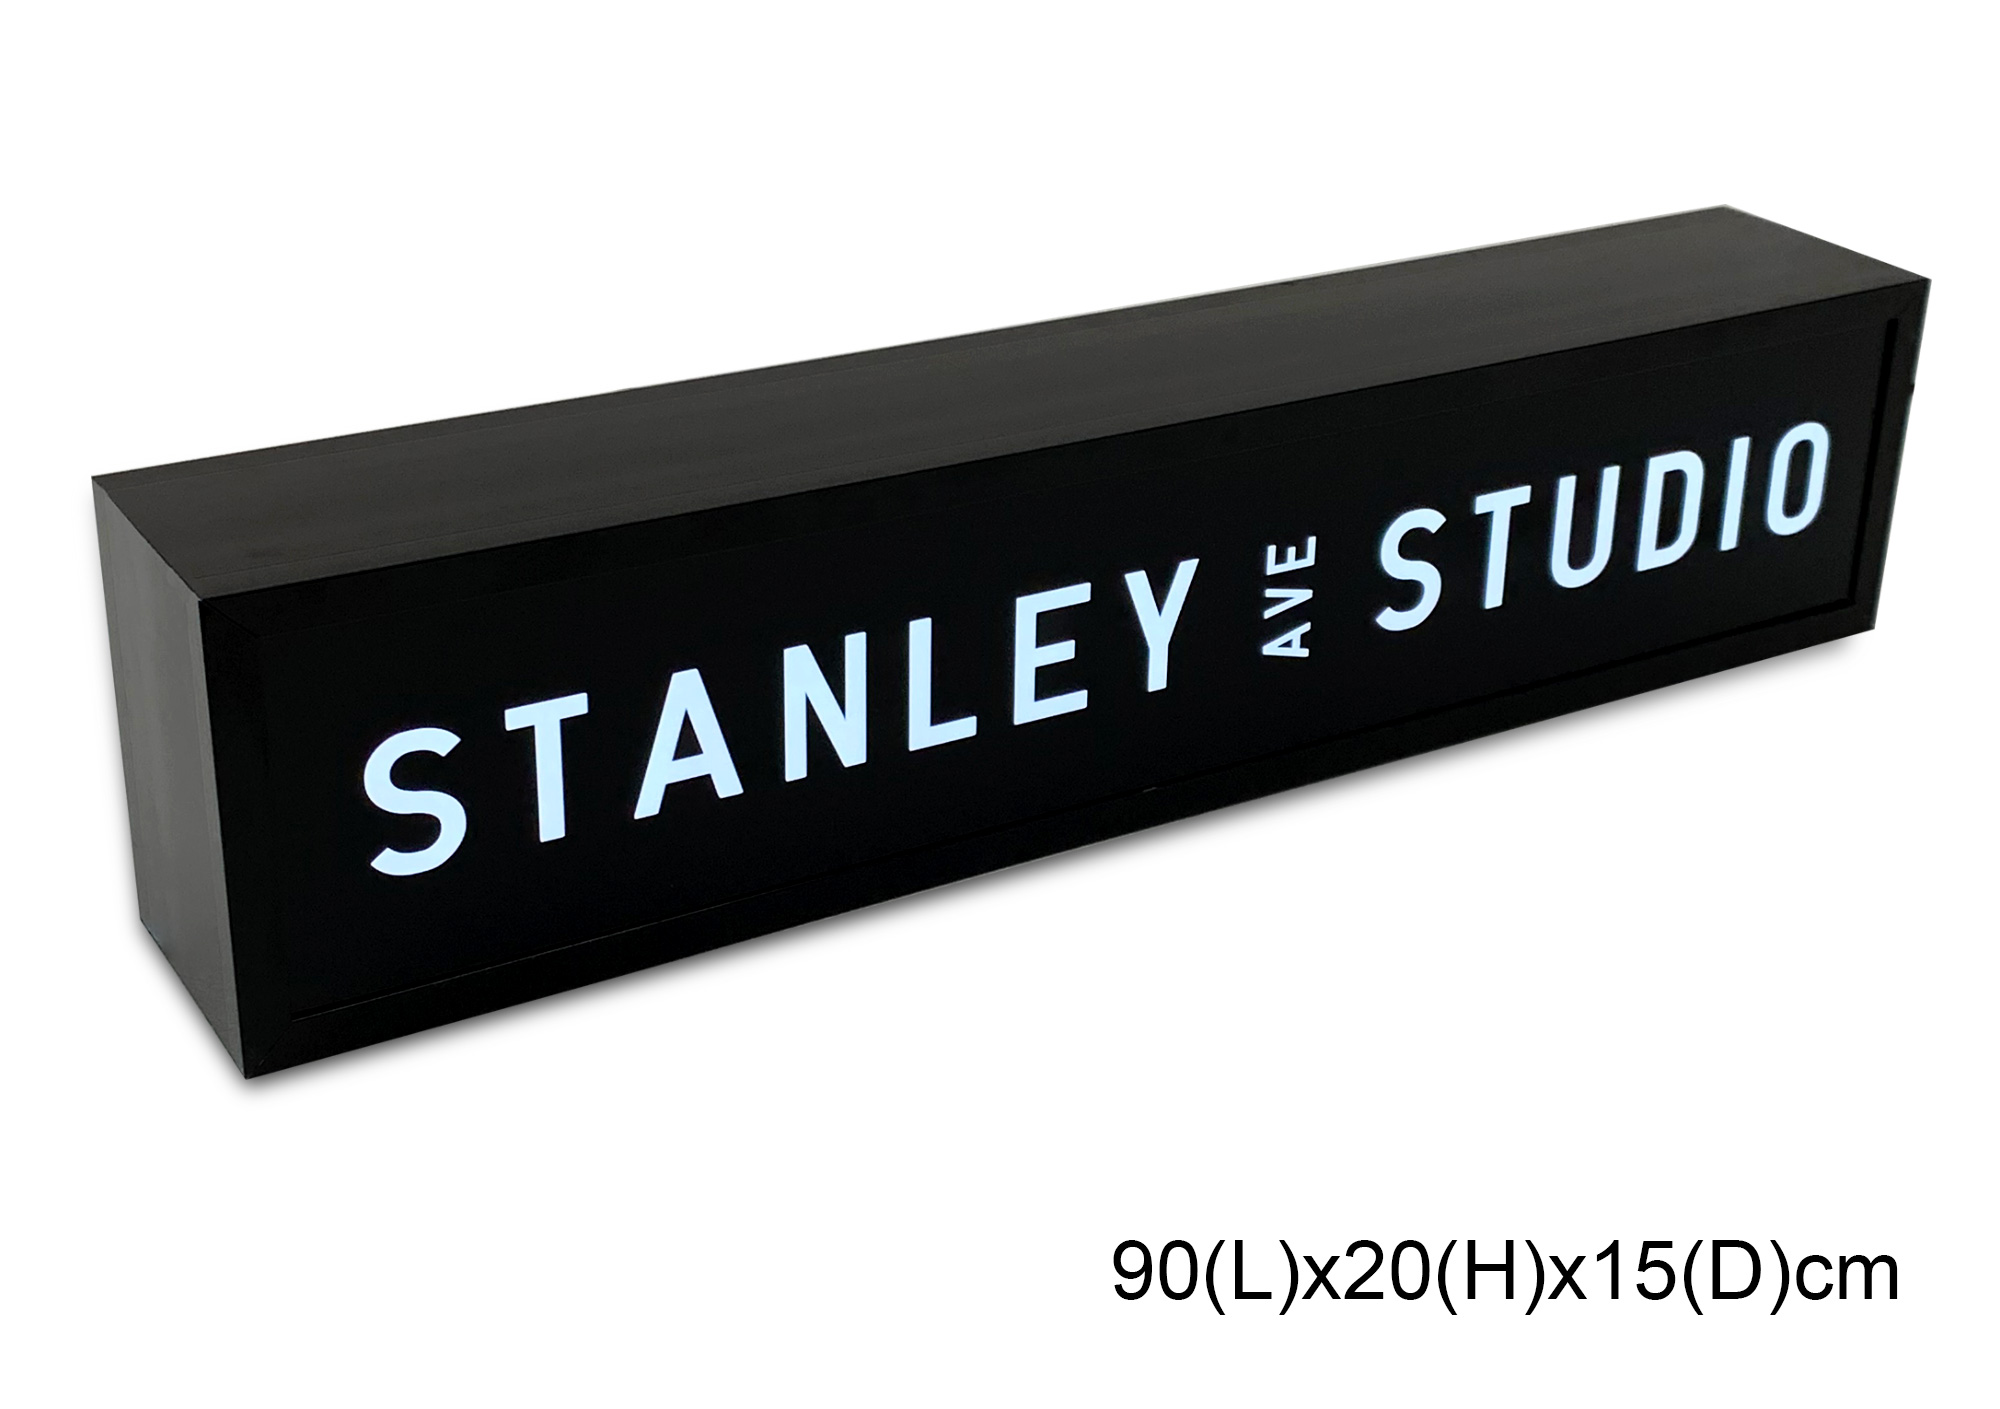 Small led lightbox for business signage